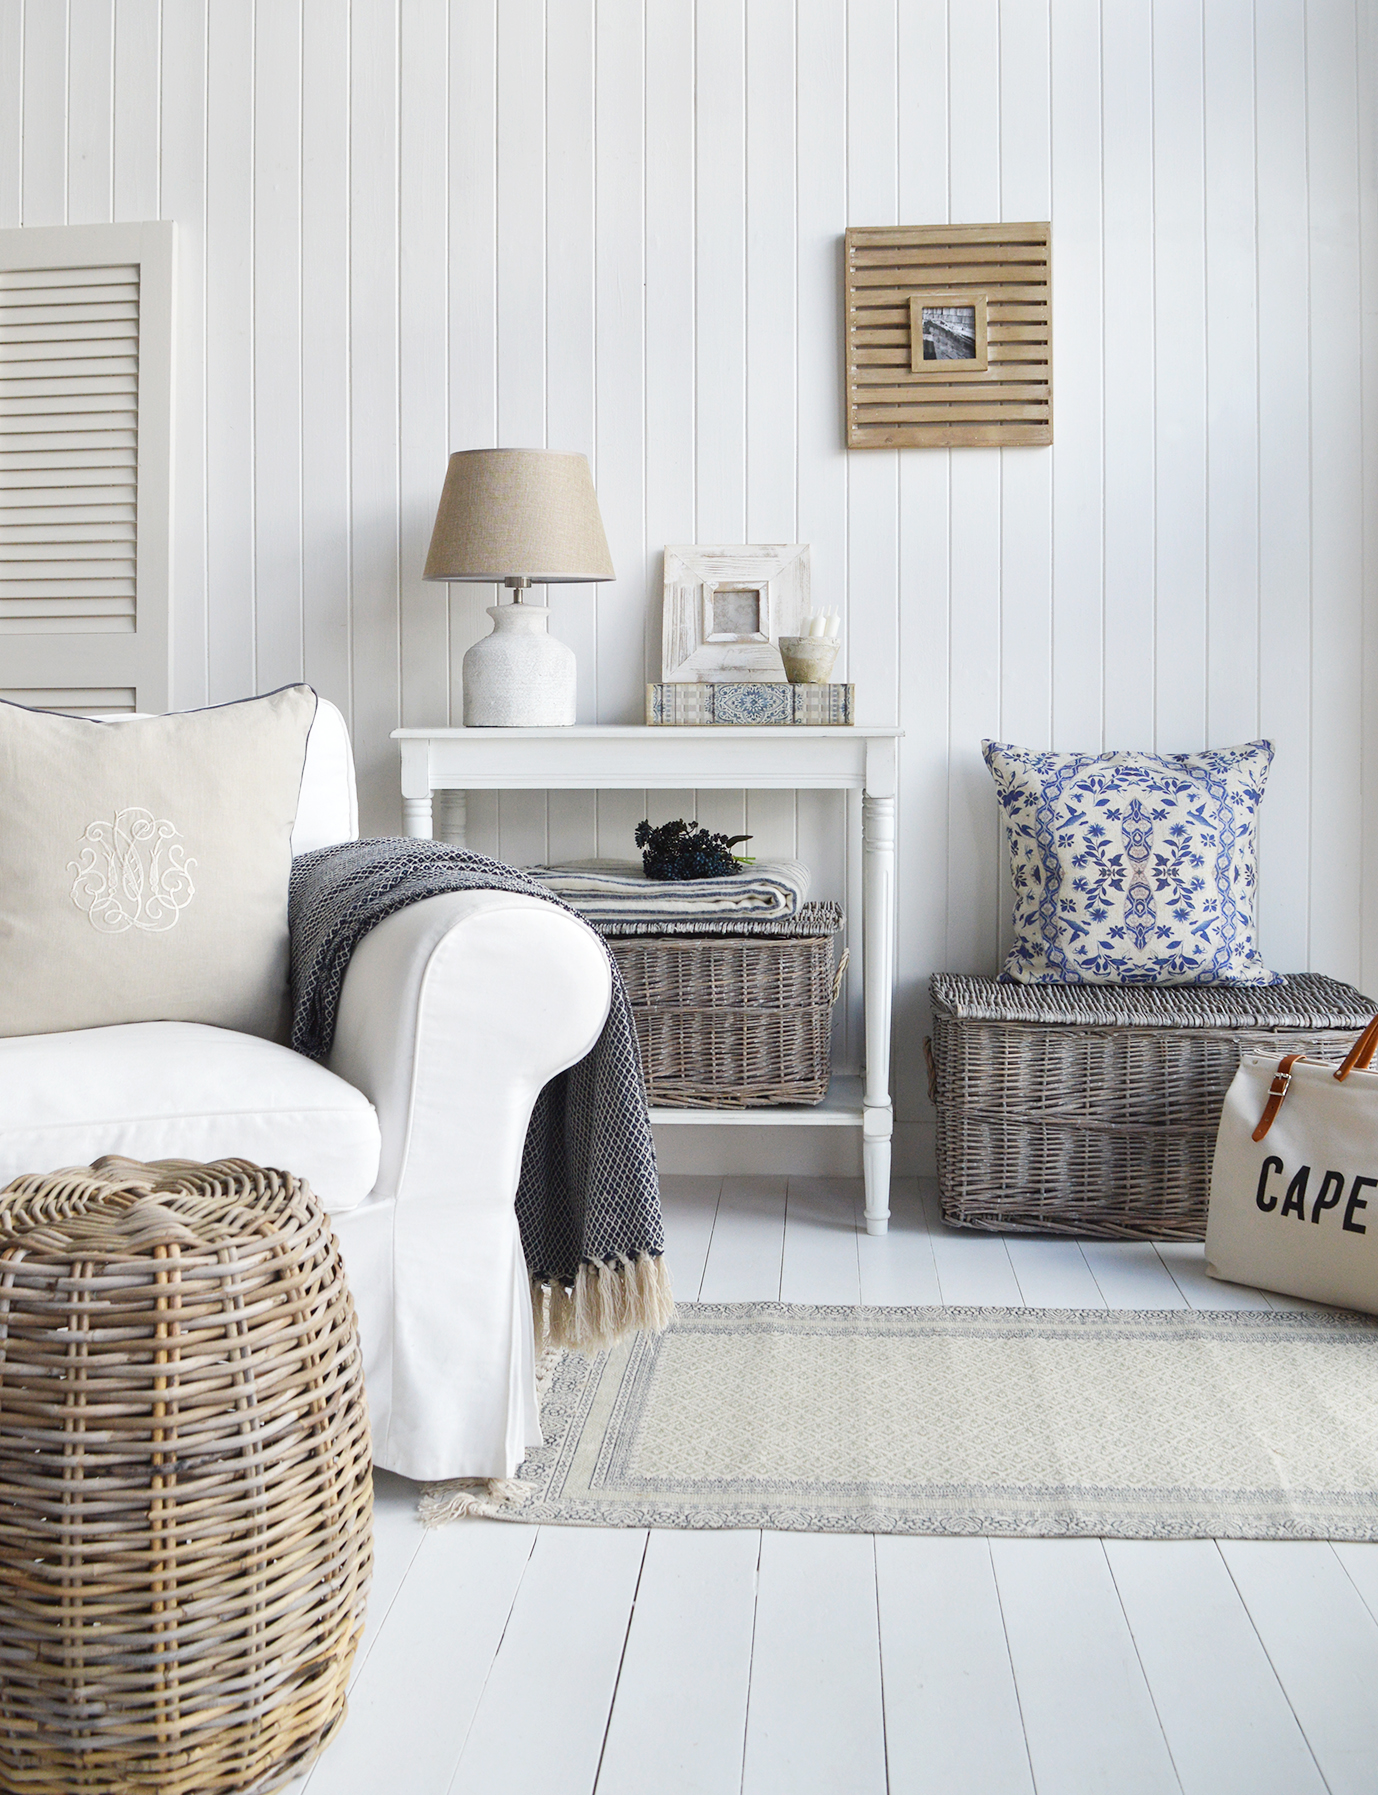 New England furniture and interiors for coastal, modern country and farmhouse furniture from The White Lighthouse